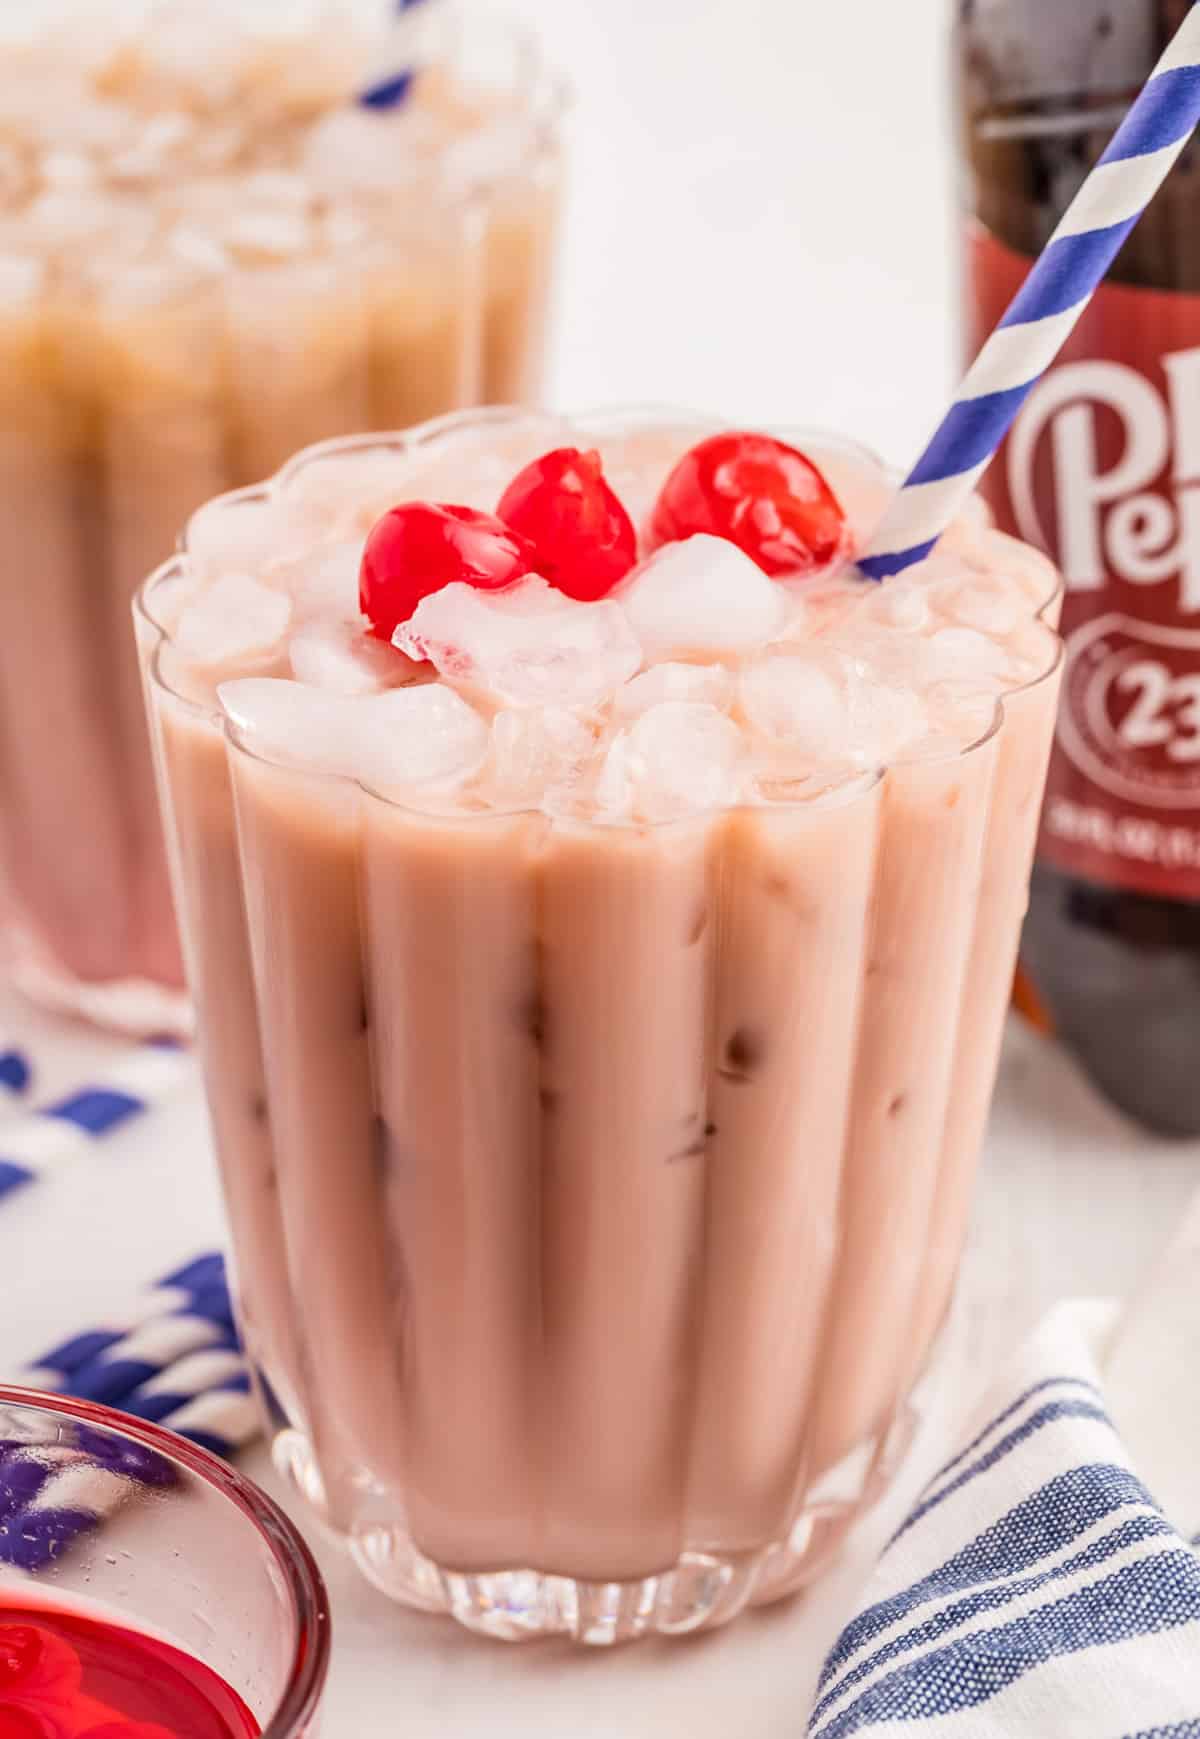 Dirty Soda in glass with ice, cherries and a blue and white straw with a bottle of doctor pepper in background.